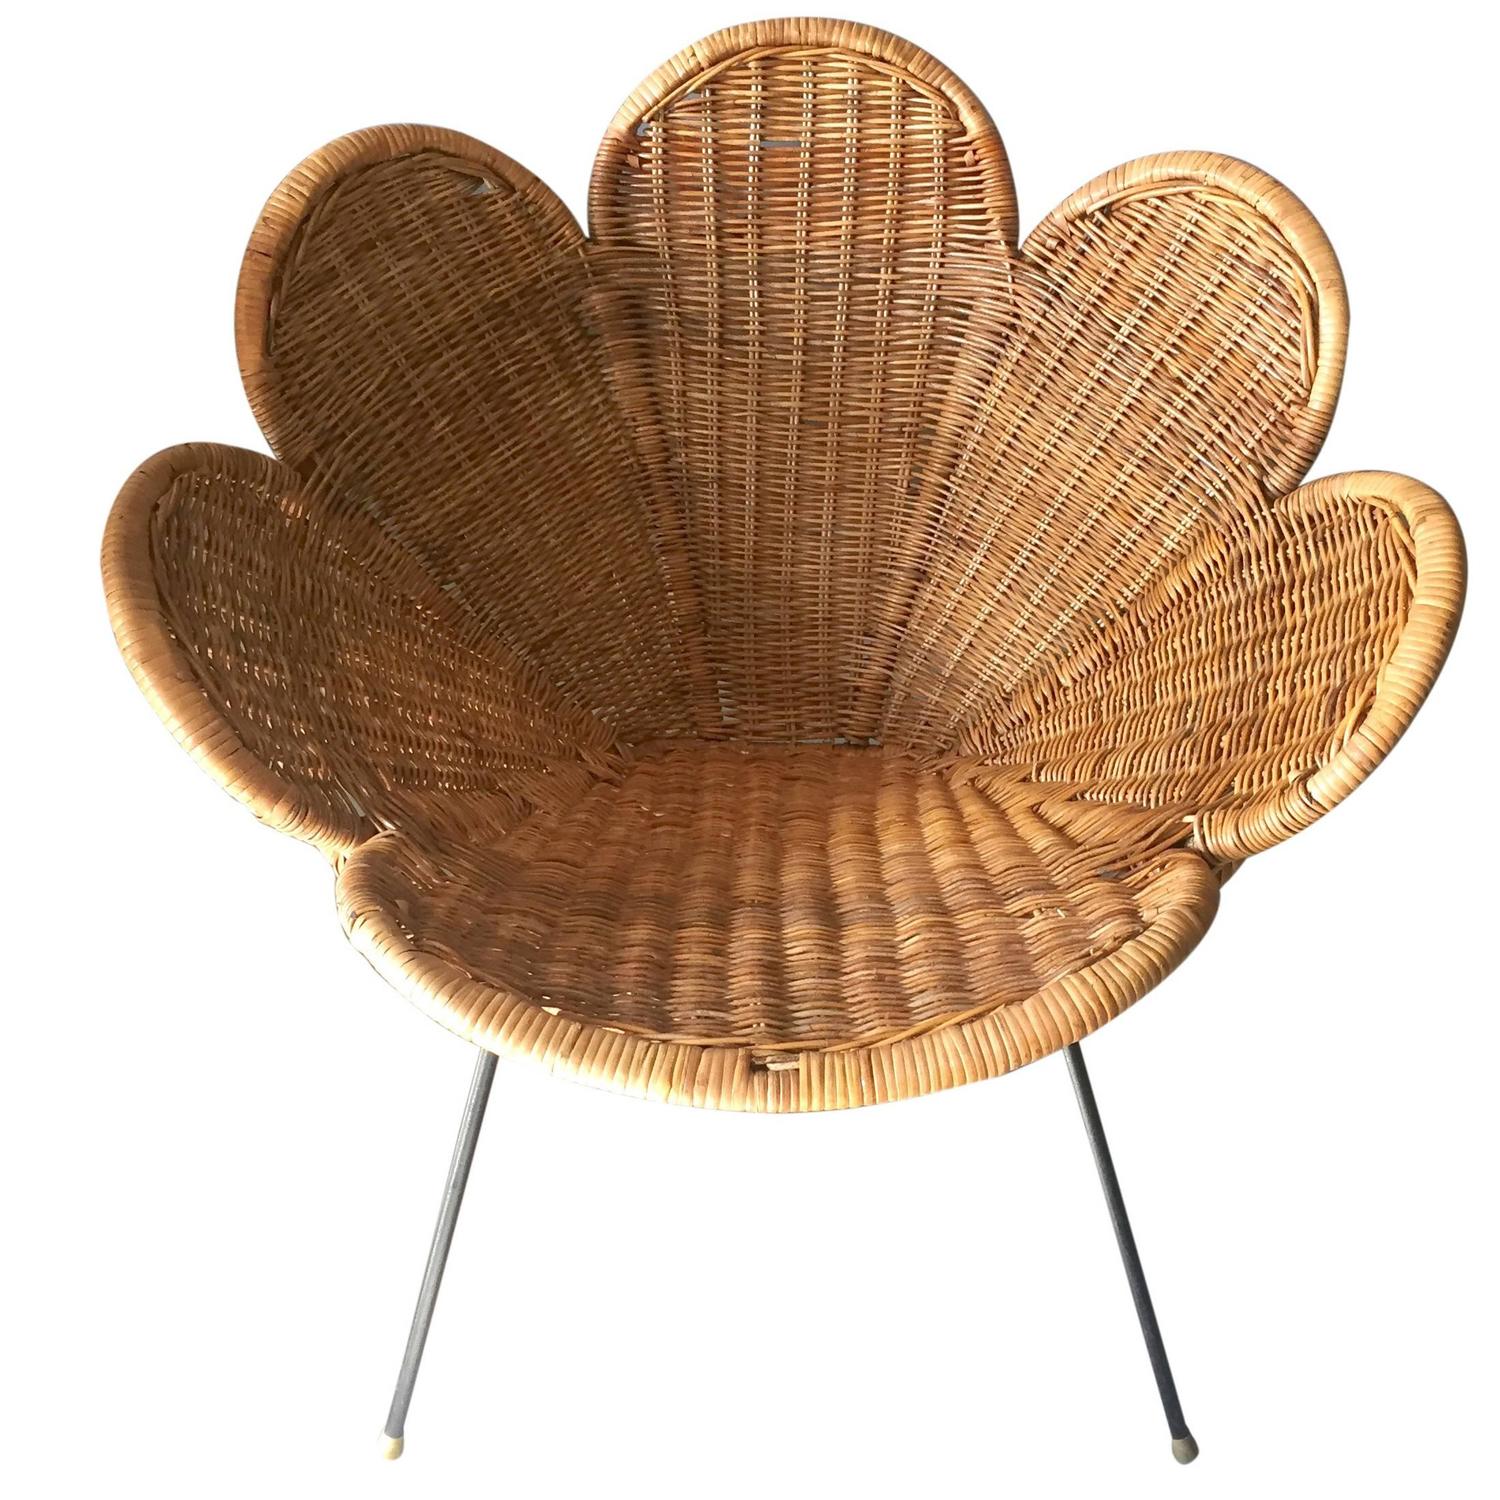 Rattan and Iron Flower Chair For Sale at 1stdibs